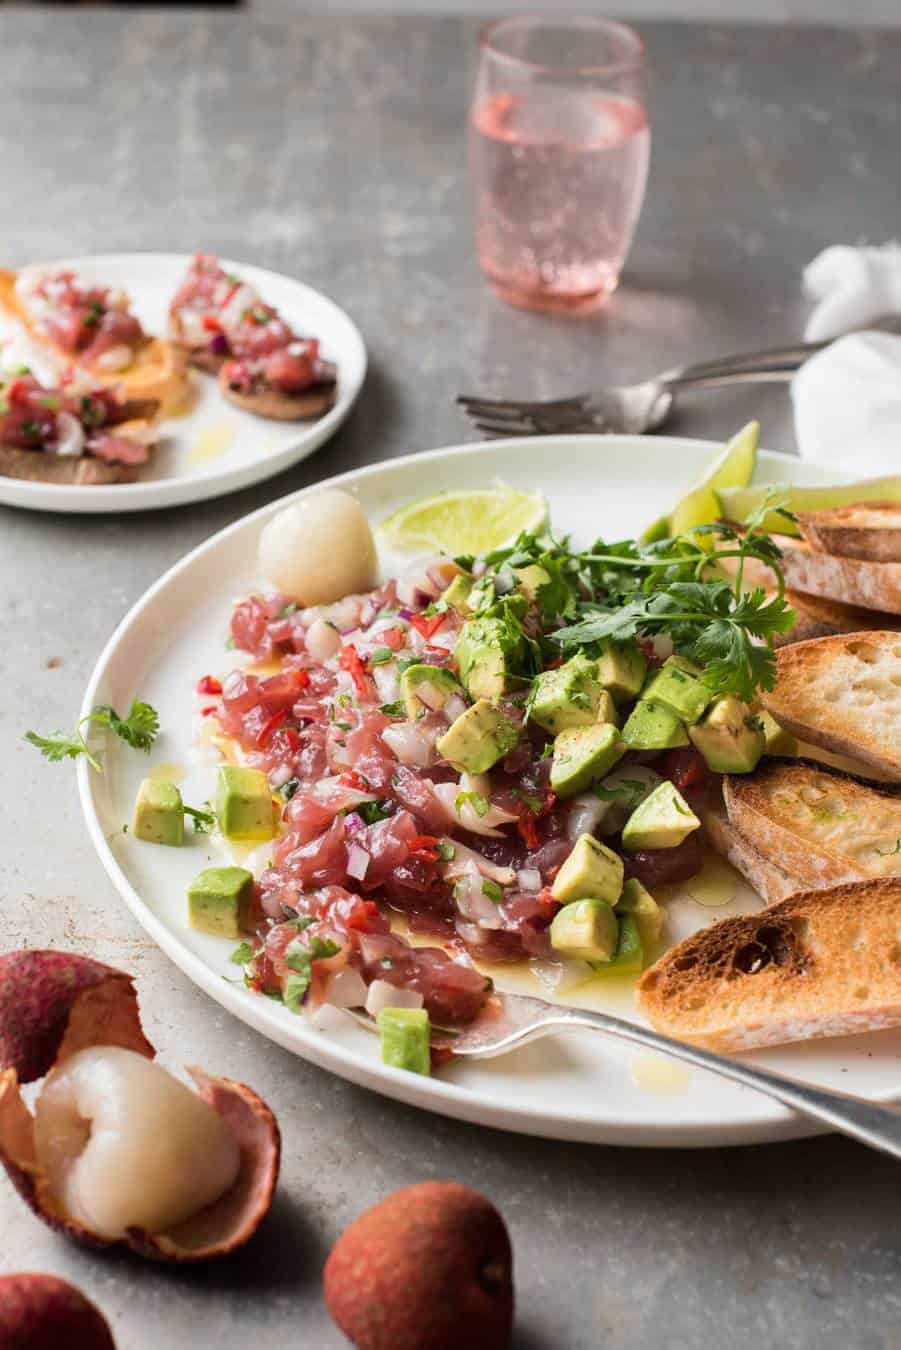 Tuna Tartare with Lychees - Simple and elegant to make, a great starter that's healthy too!